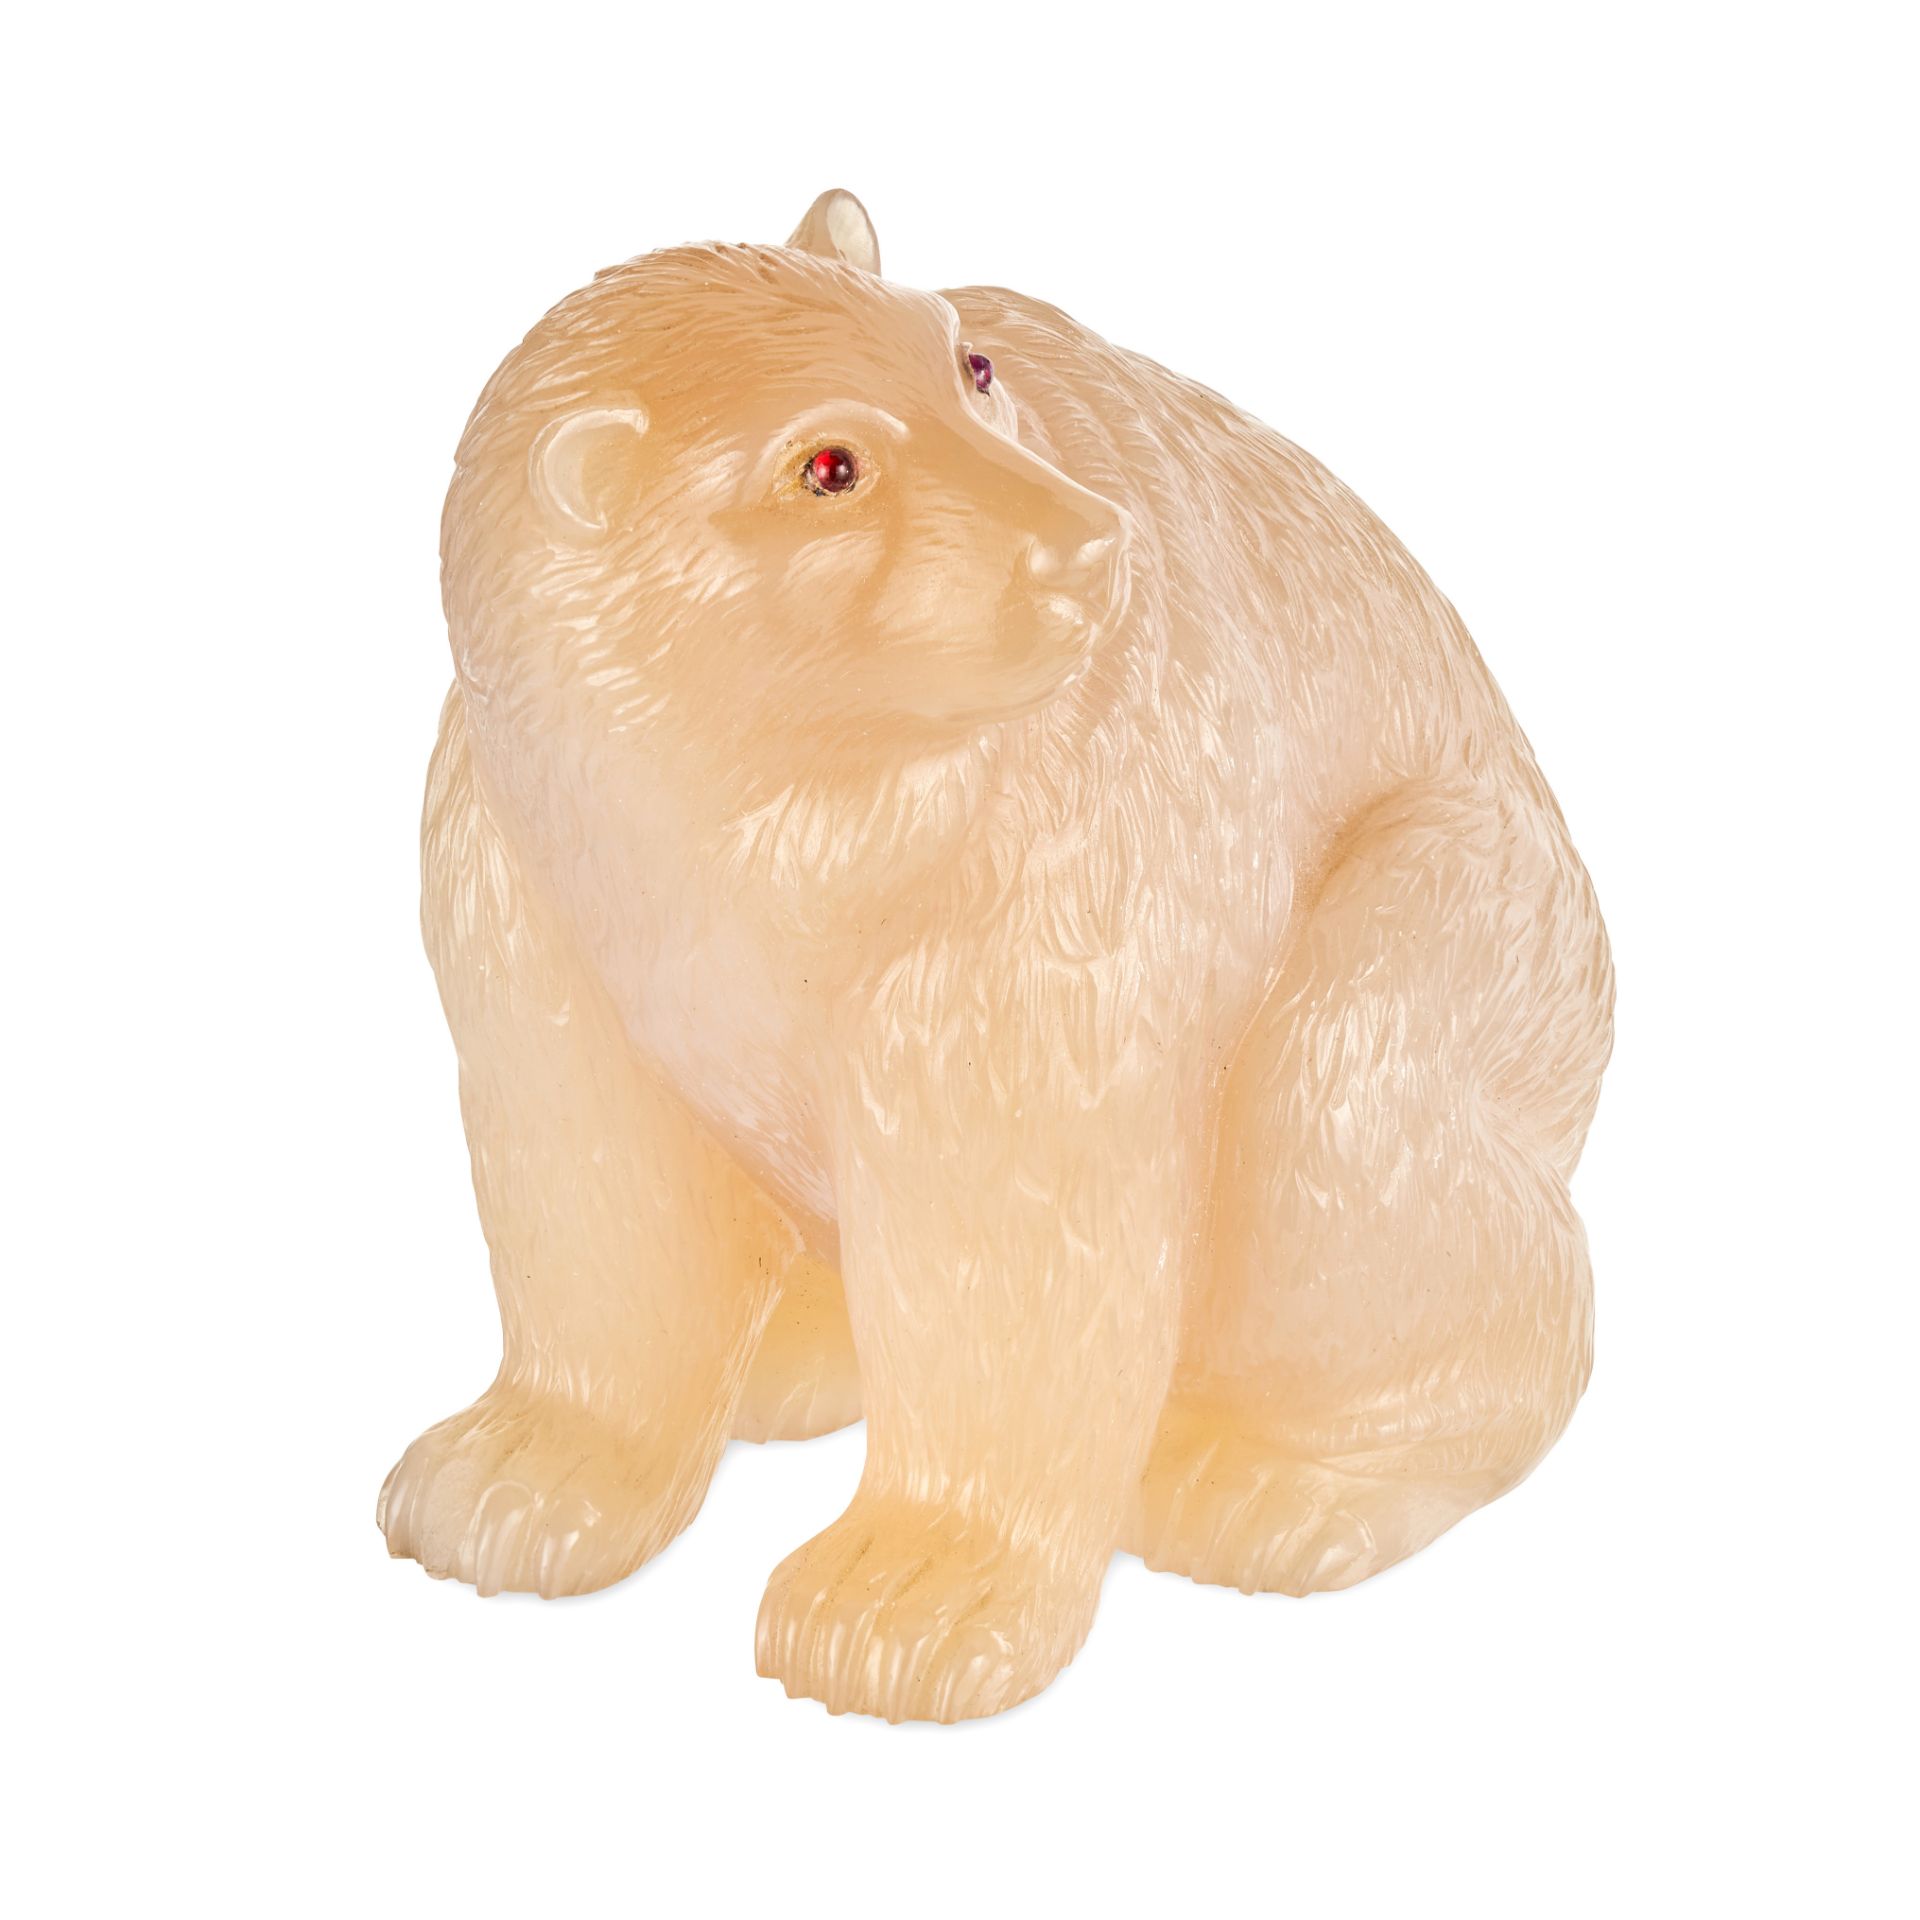 FABERGE, A RARE JEWELLED AGATE MODEL OF A POLAR BEAR, ST PETERSBURG, CIRCA 1900 - Image 3 of 10